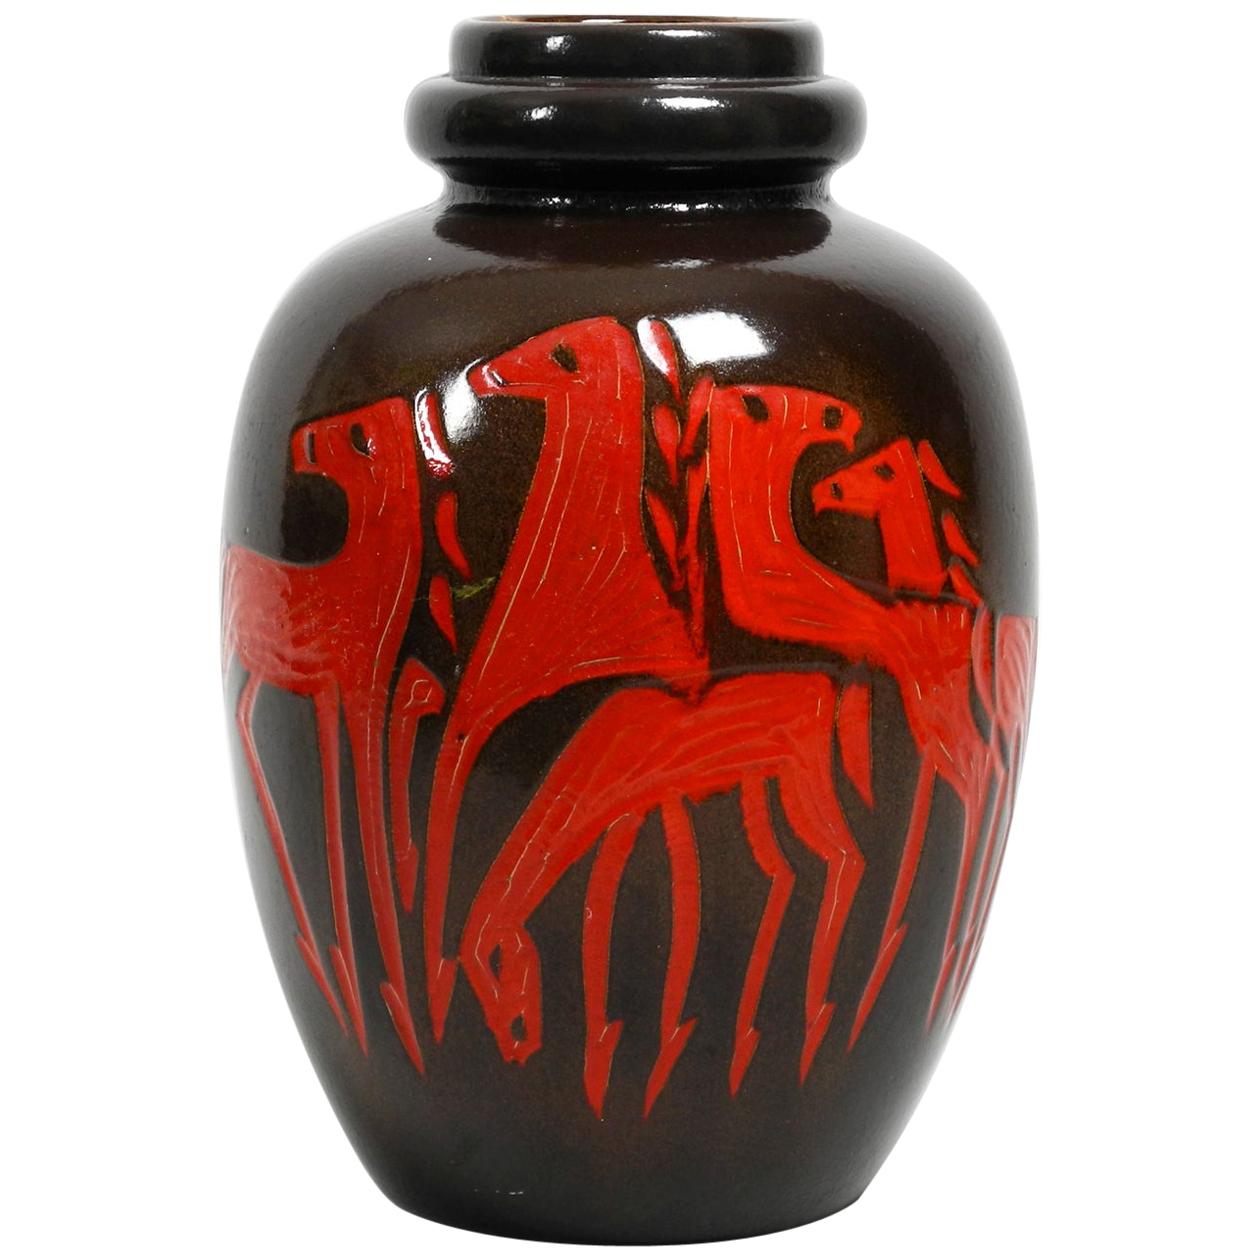 Very Nice Extra Large Dark Brown Ceramic Floor Vase with Red Abstract Horses